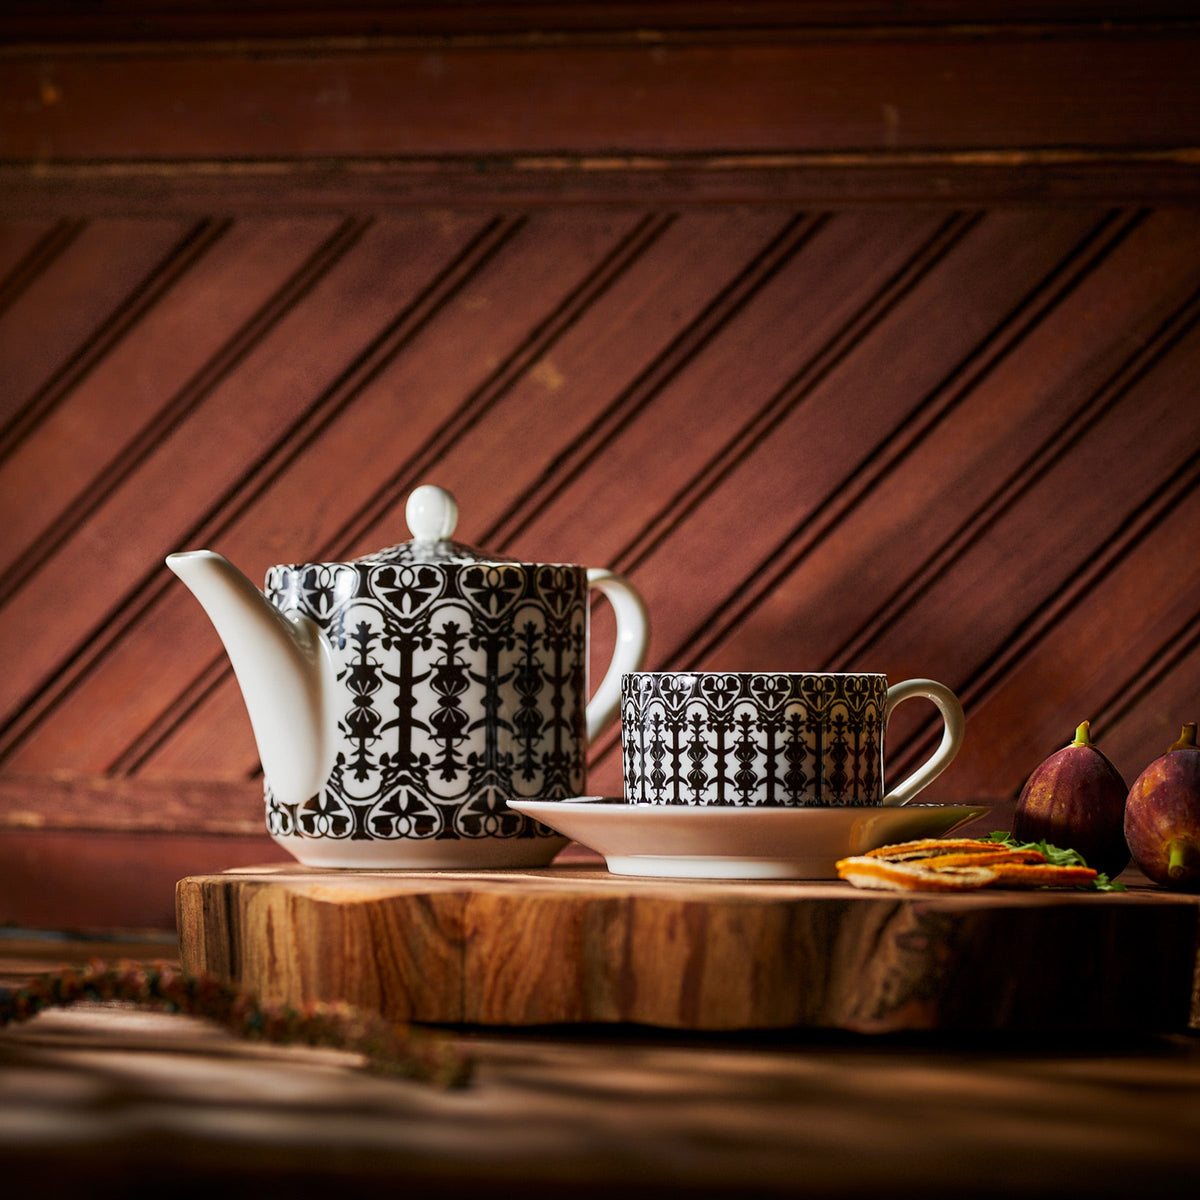 A Casablanca Petite Teapot from Caskata and a cup on a wooden cutting board.